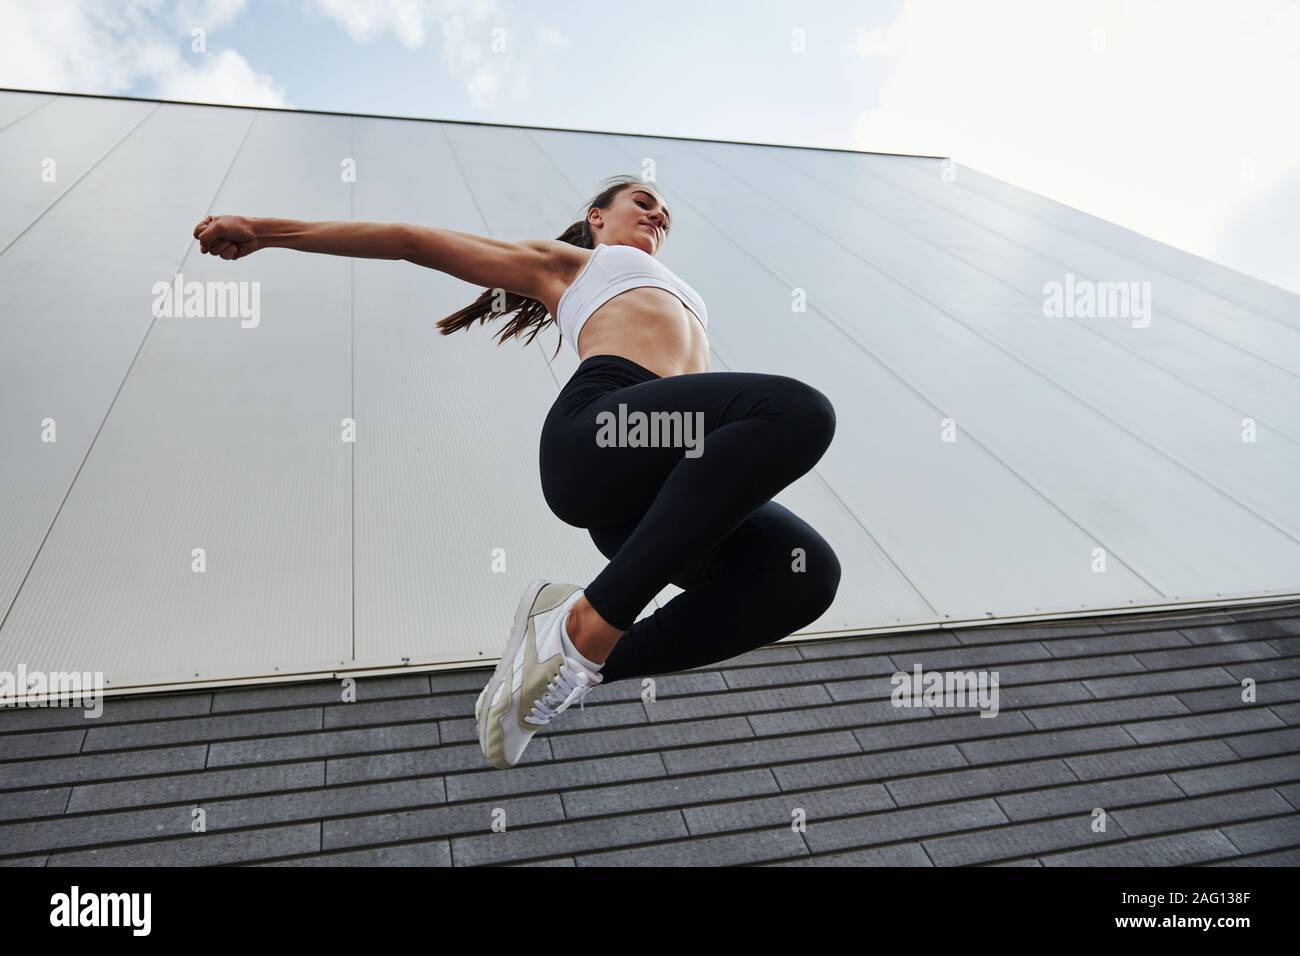 Bottom view. Young sportswoman doing parkour in the city at sunny daytime Stock Photo